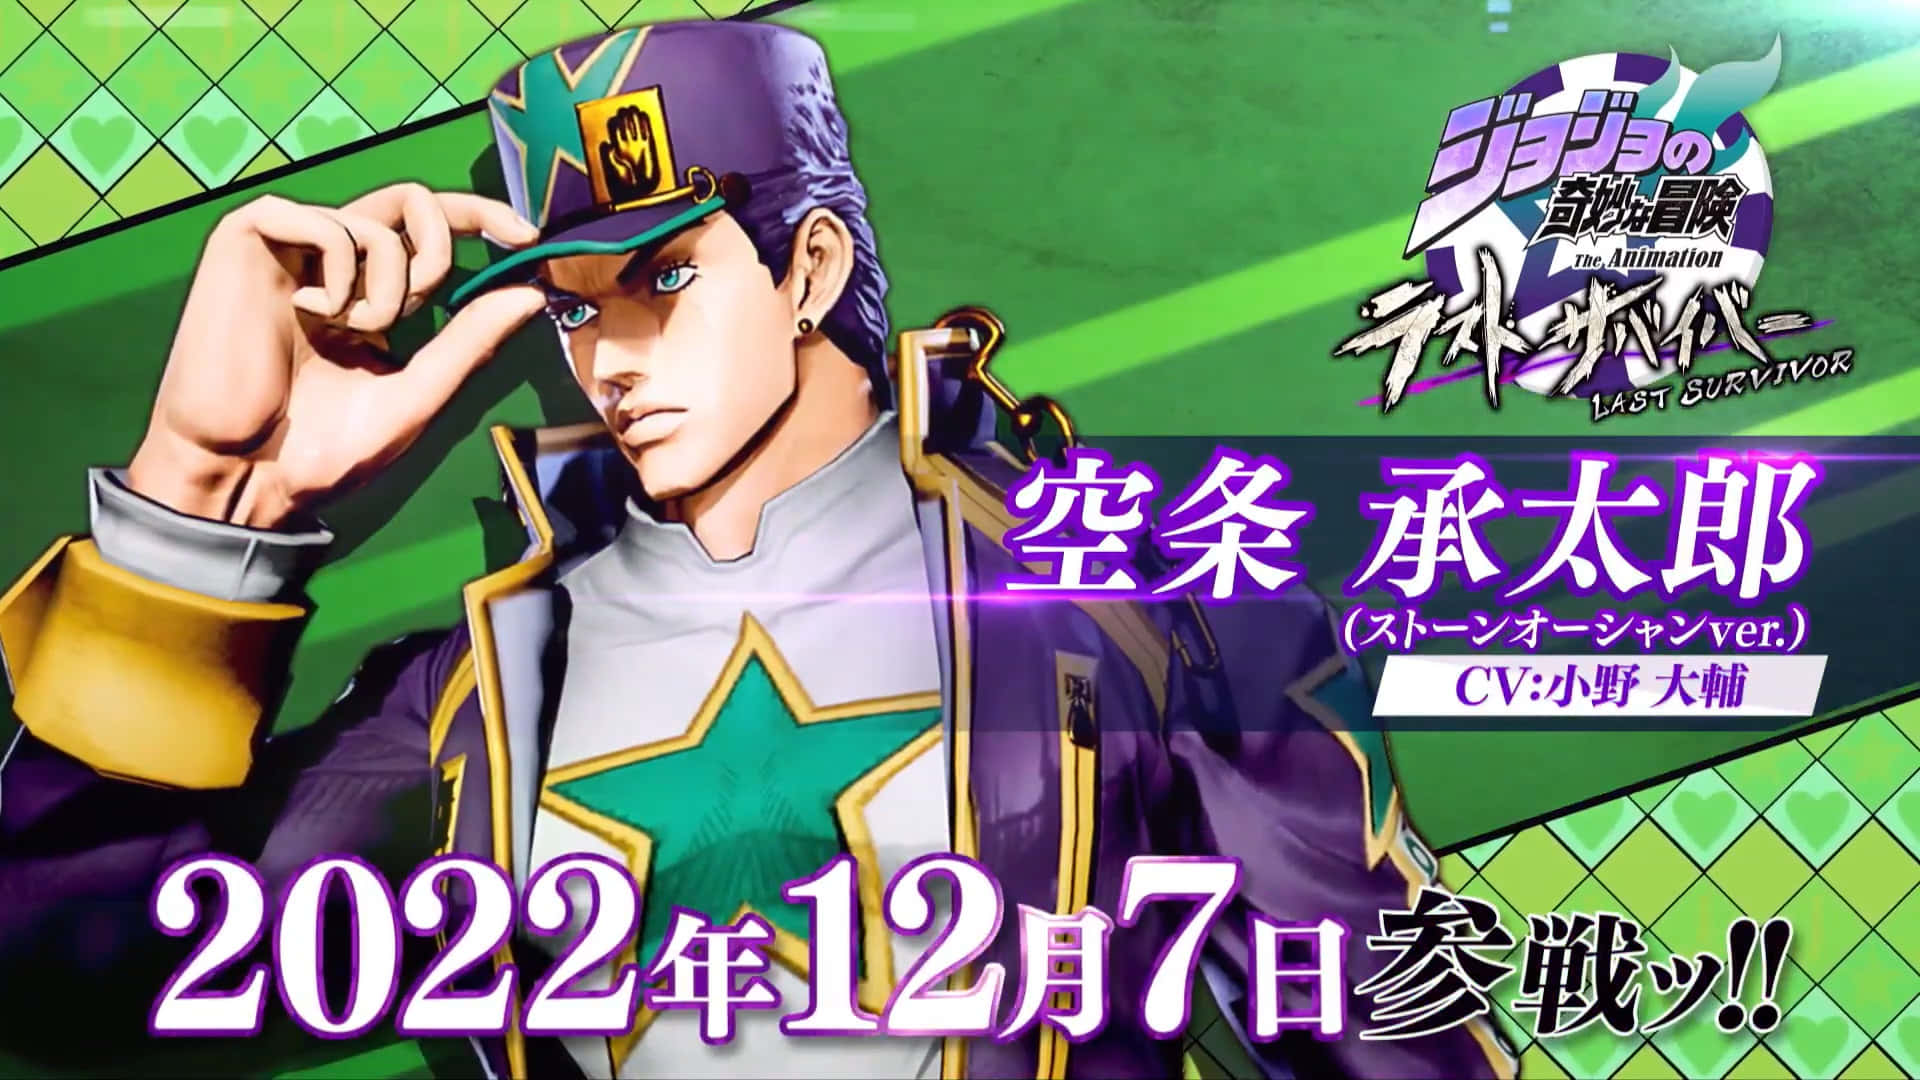 Jotaro kujo with 'the world' stand, ready for battle